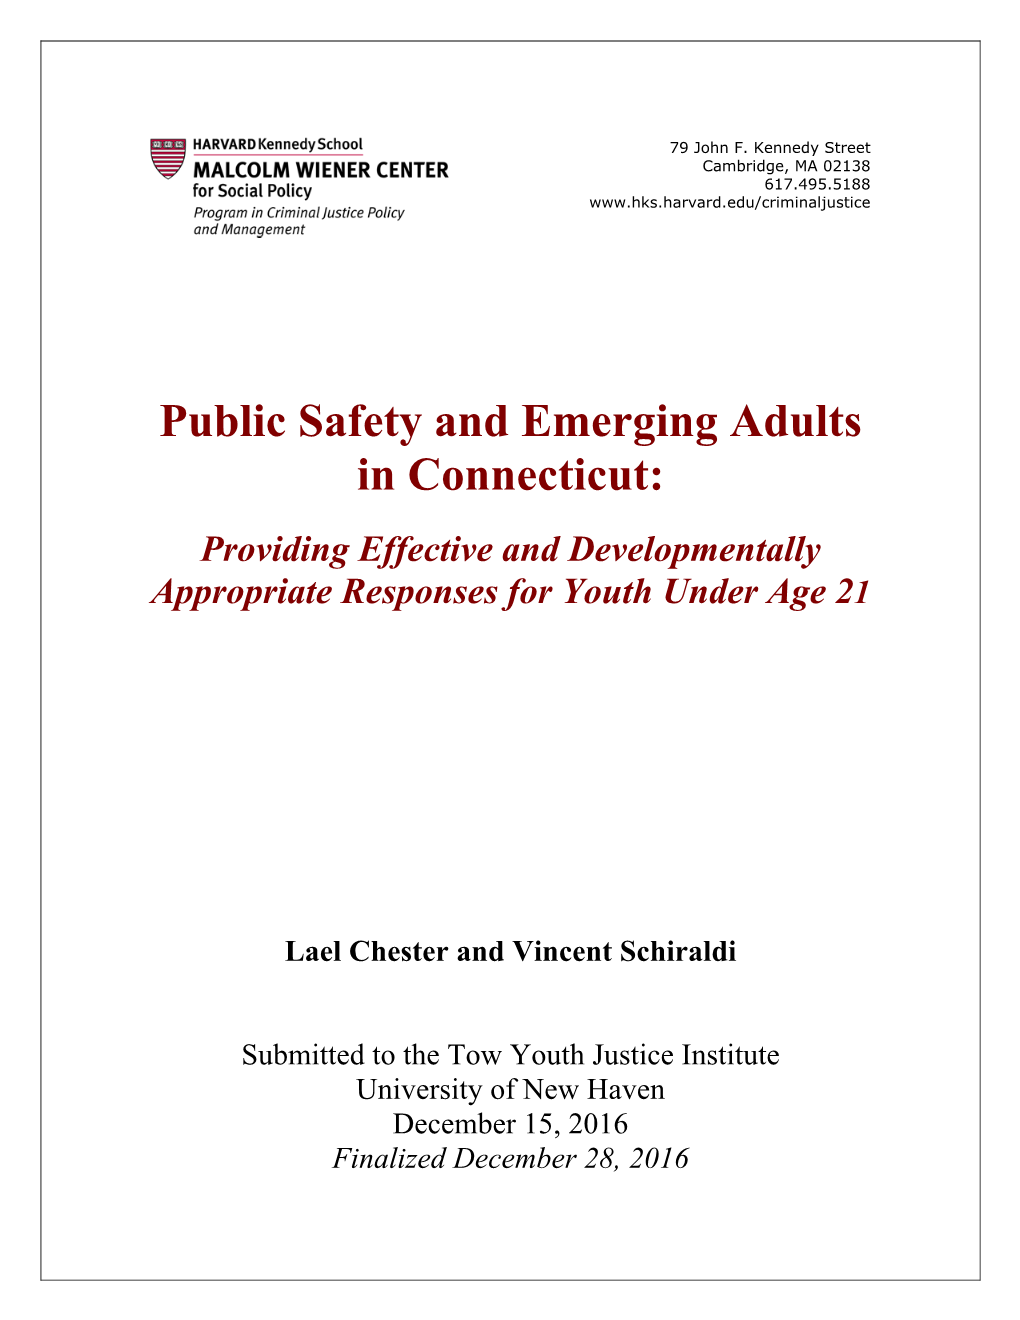 Public Safety and Emerging Adults in Connecticut: Providing Effective and Developmentally Appropriate Responses for Youth Under Age 21